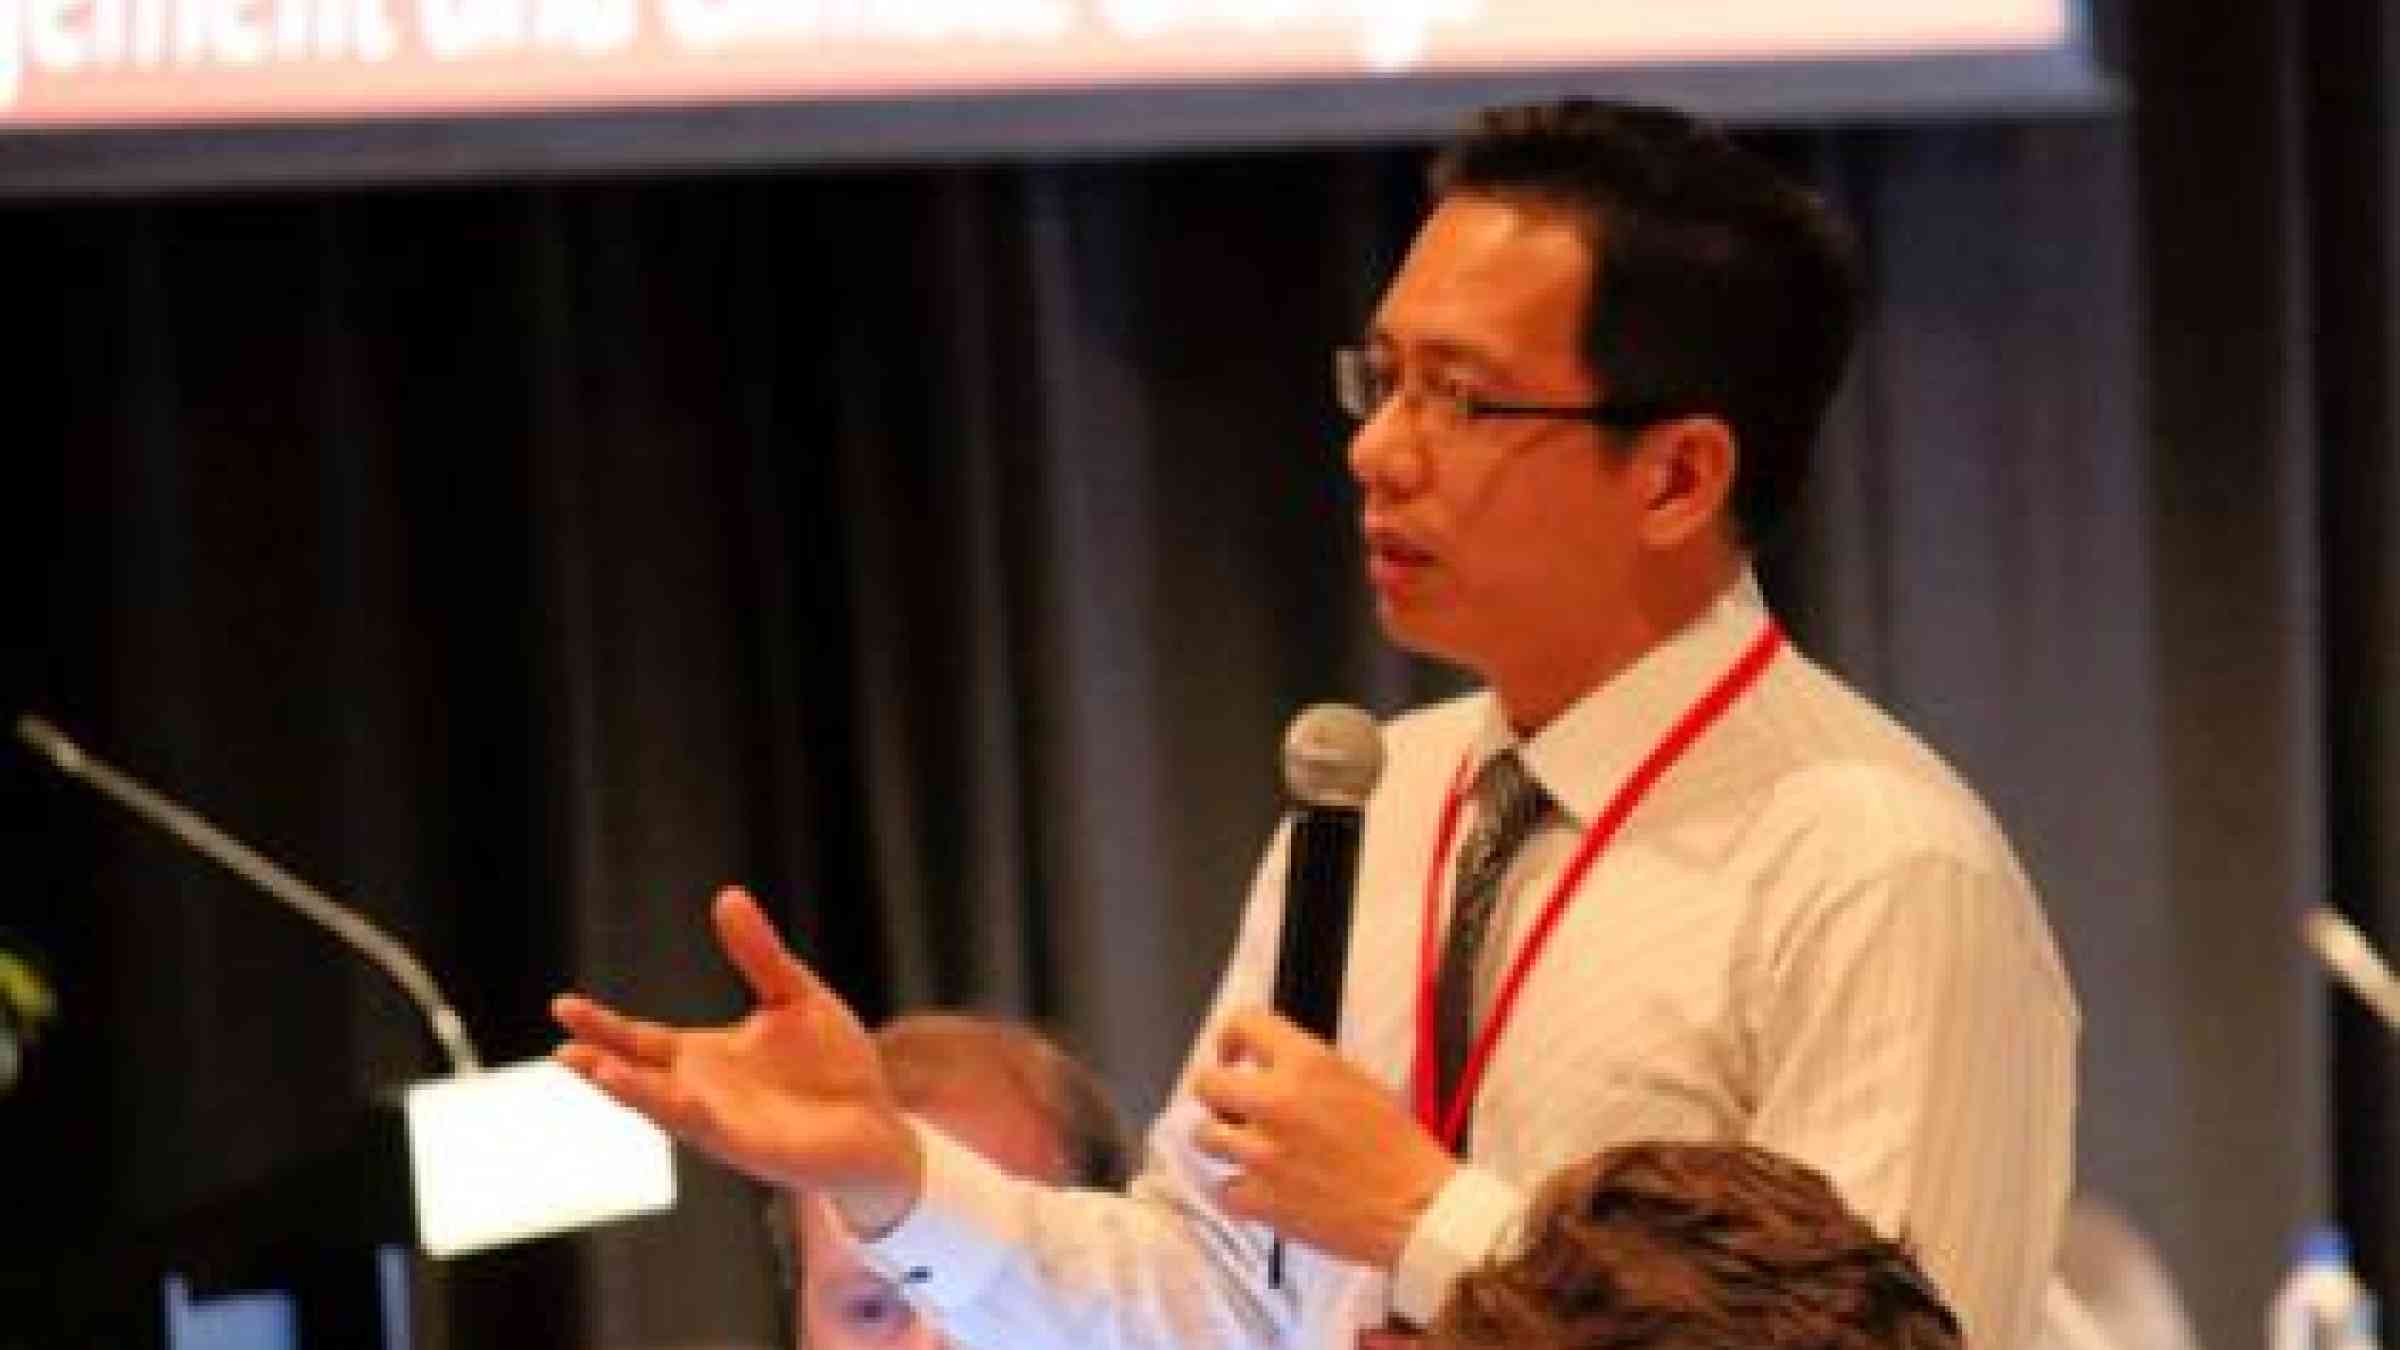 Jerry Velasquez, Head of UNISDR's office in the Asia-Pacific region, speaking at the 2013 Pacific Platform for Disaster Risk Management.